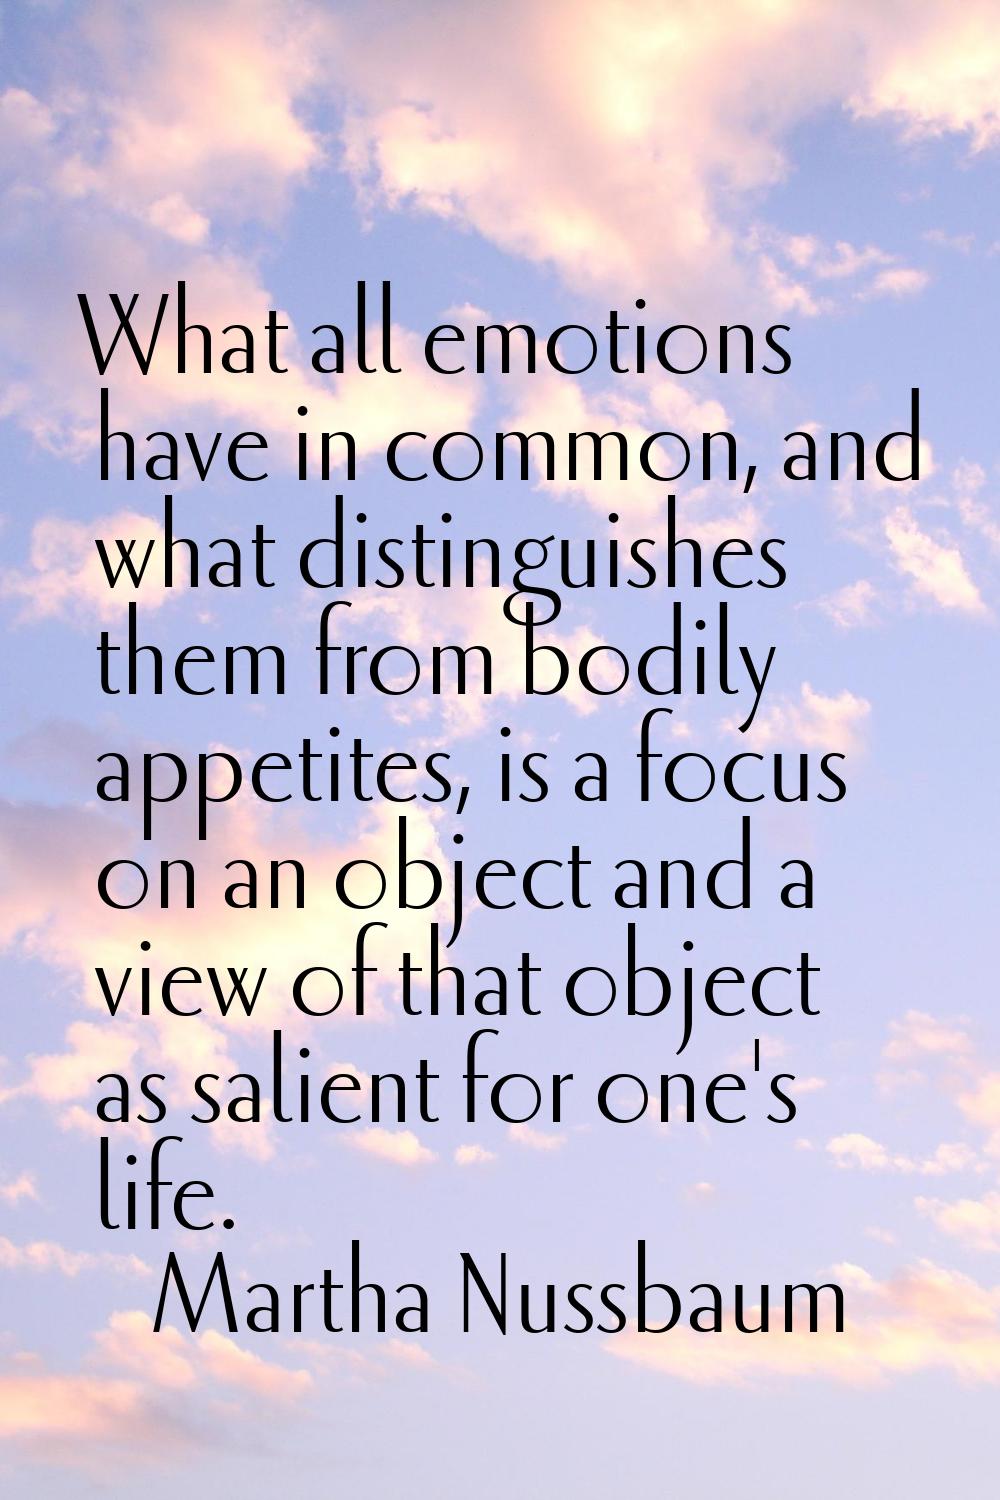 What all emotions have in common, and what distinguishes them from bodily appetites, is a focus on 